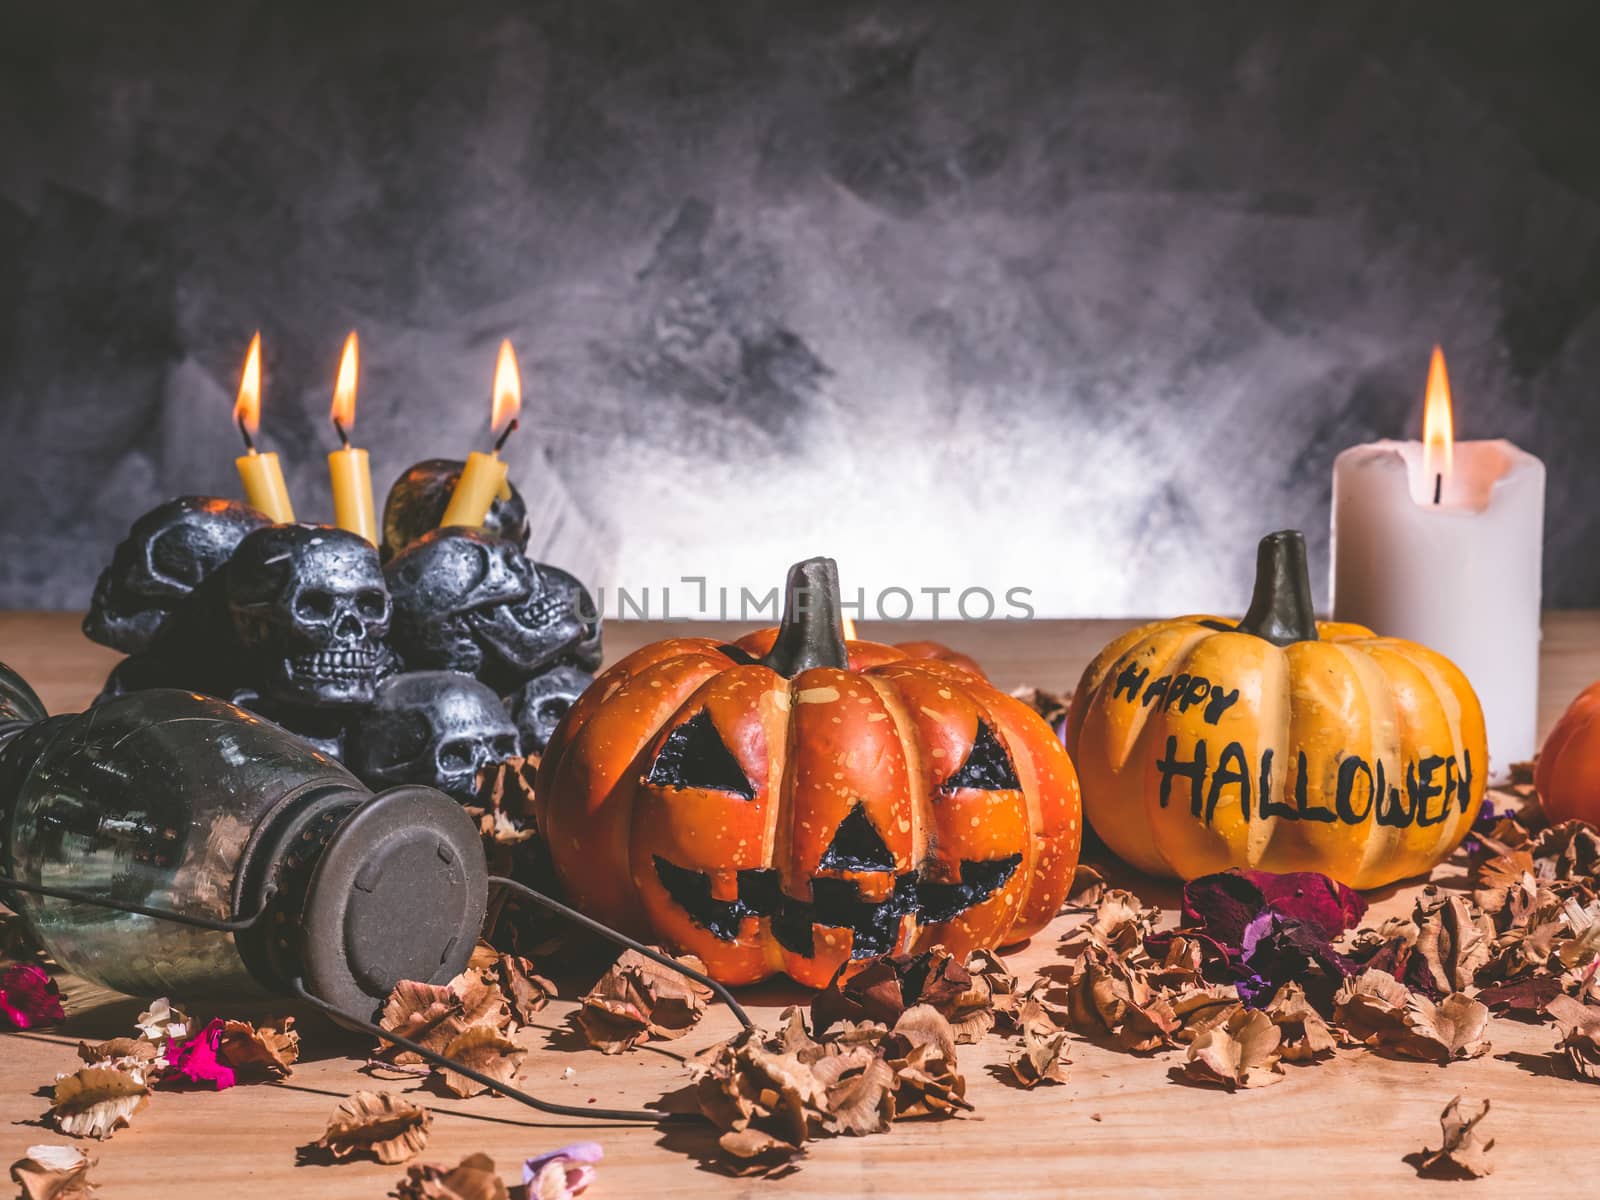 Halloween pumpkins with candlelight and skulls on dark background.